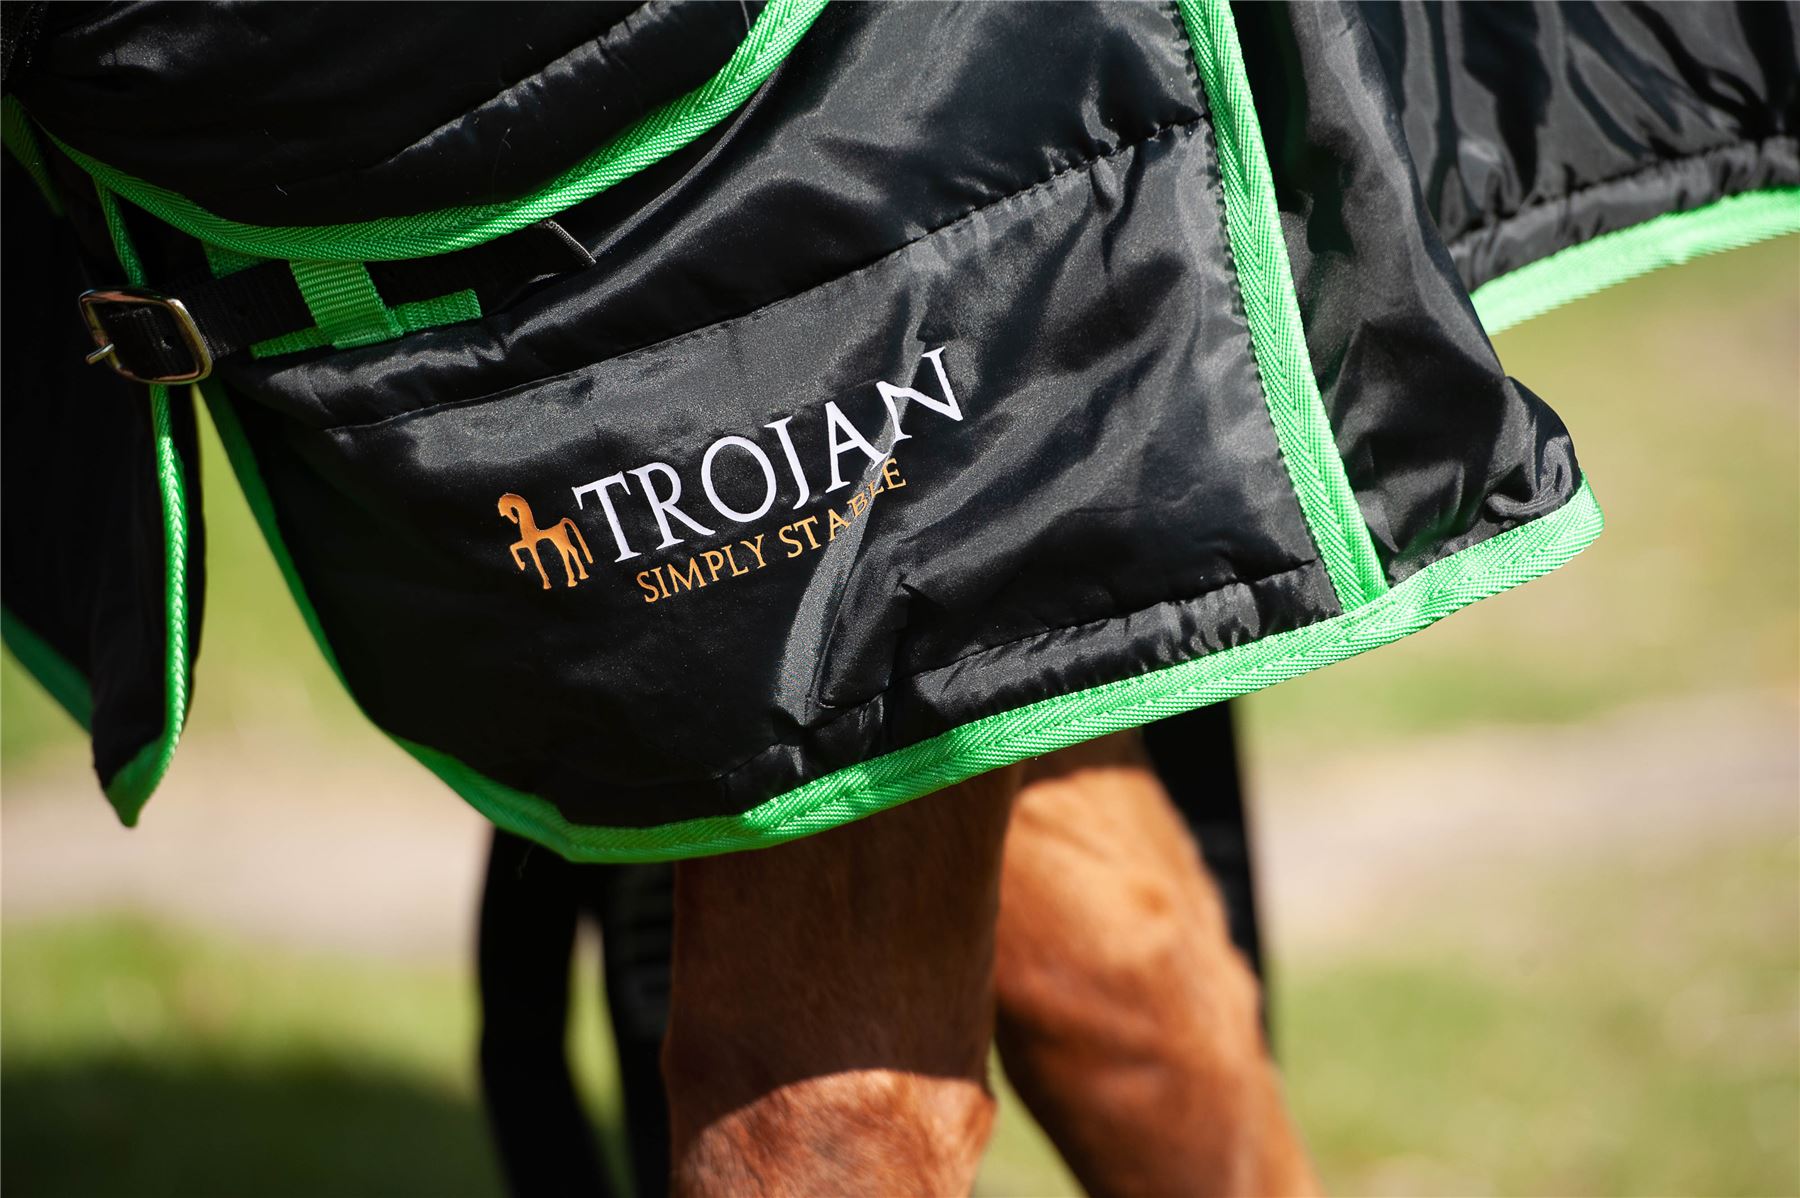 Gallop Equestrian Trojan Dual 300 Stable Rug & Neck Set - Just Horse Riders